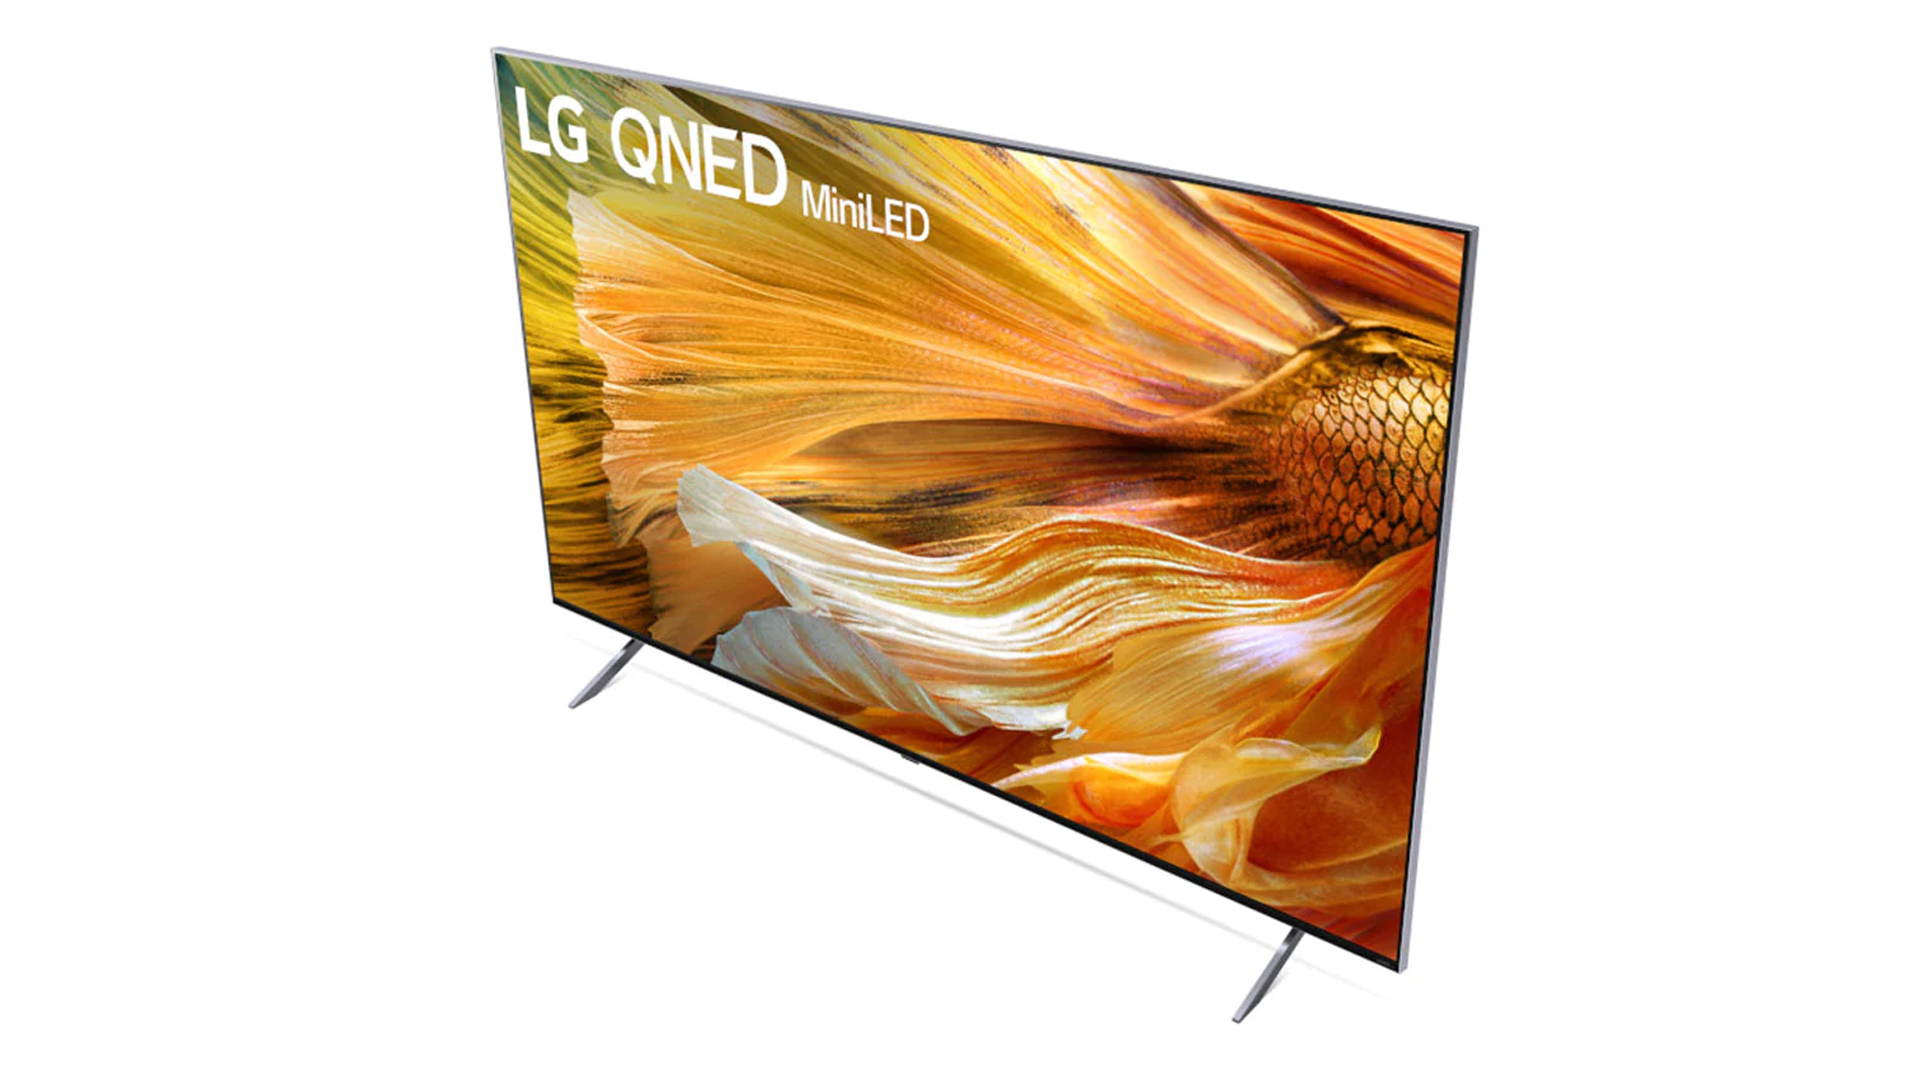 LG's QNED MiniLED 90 Series 2021 TV